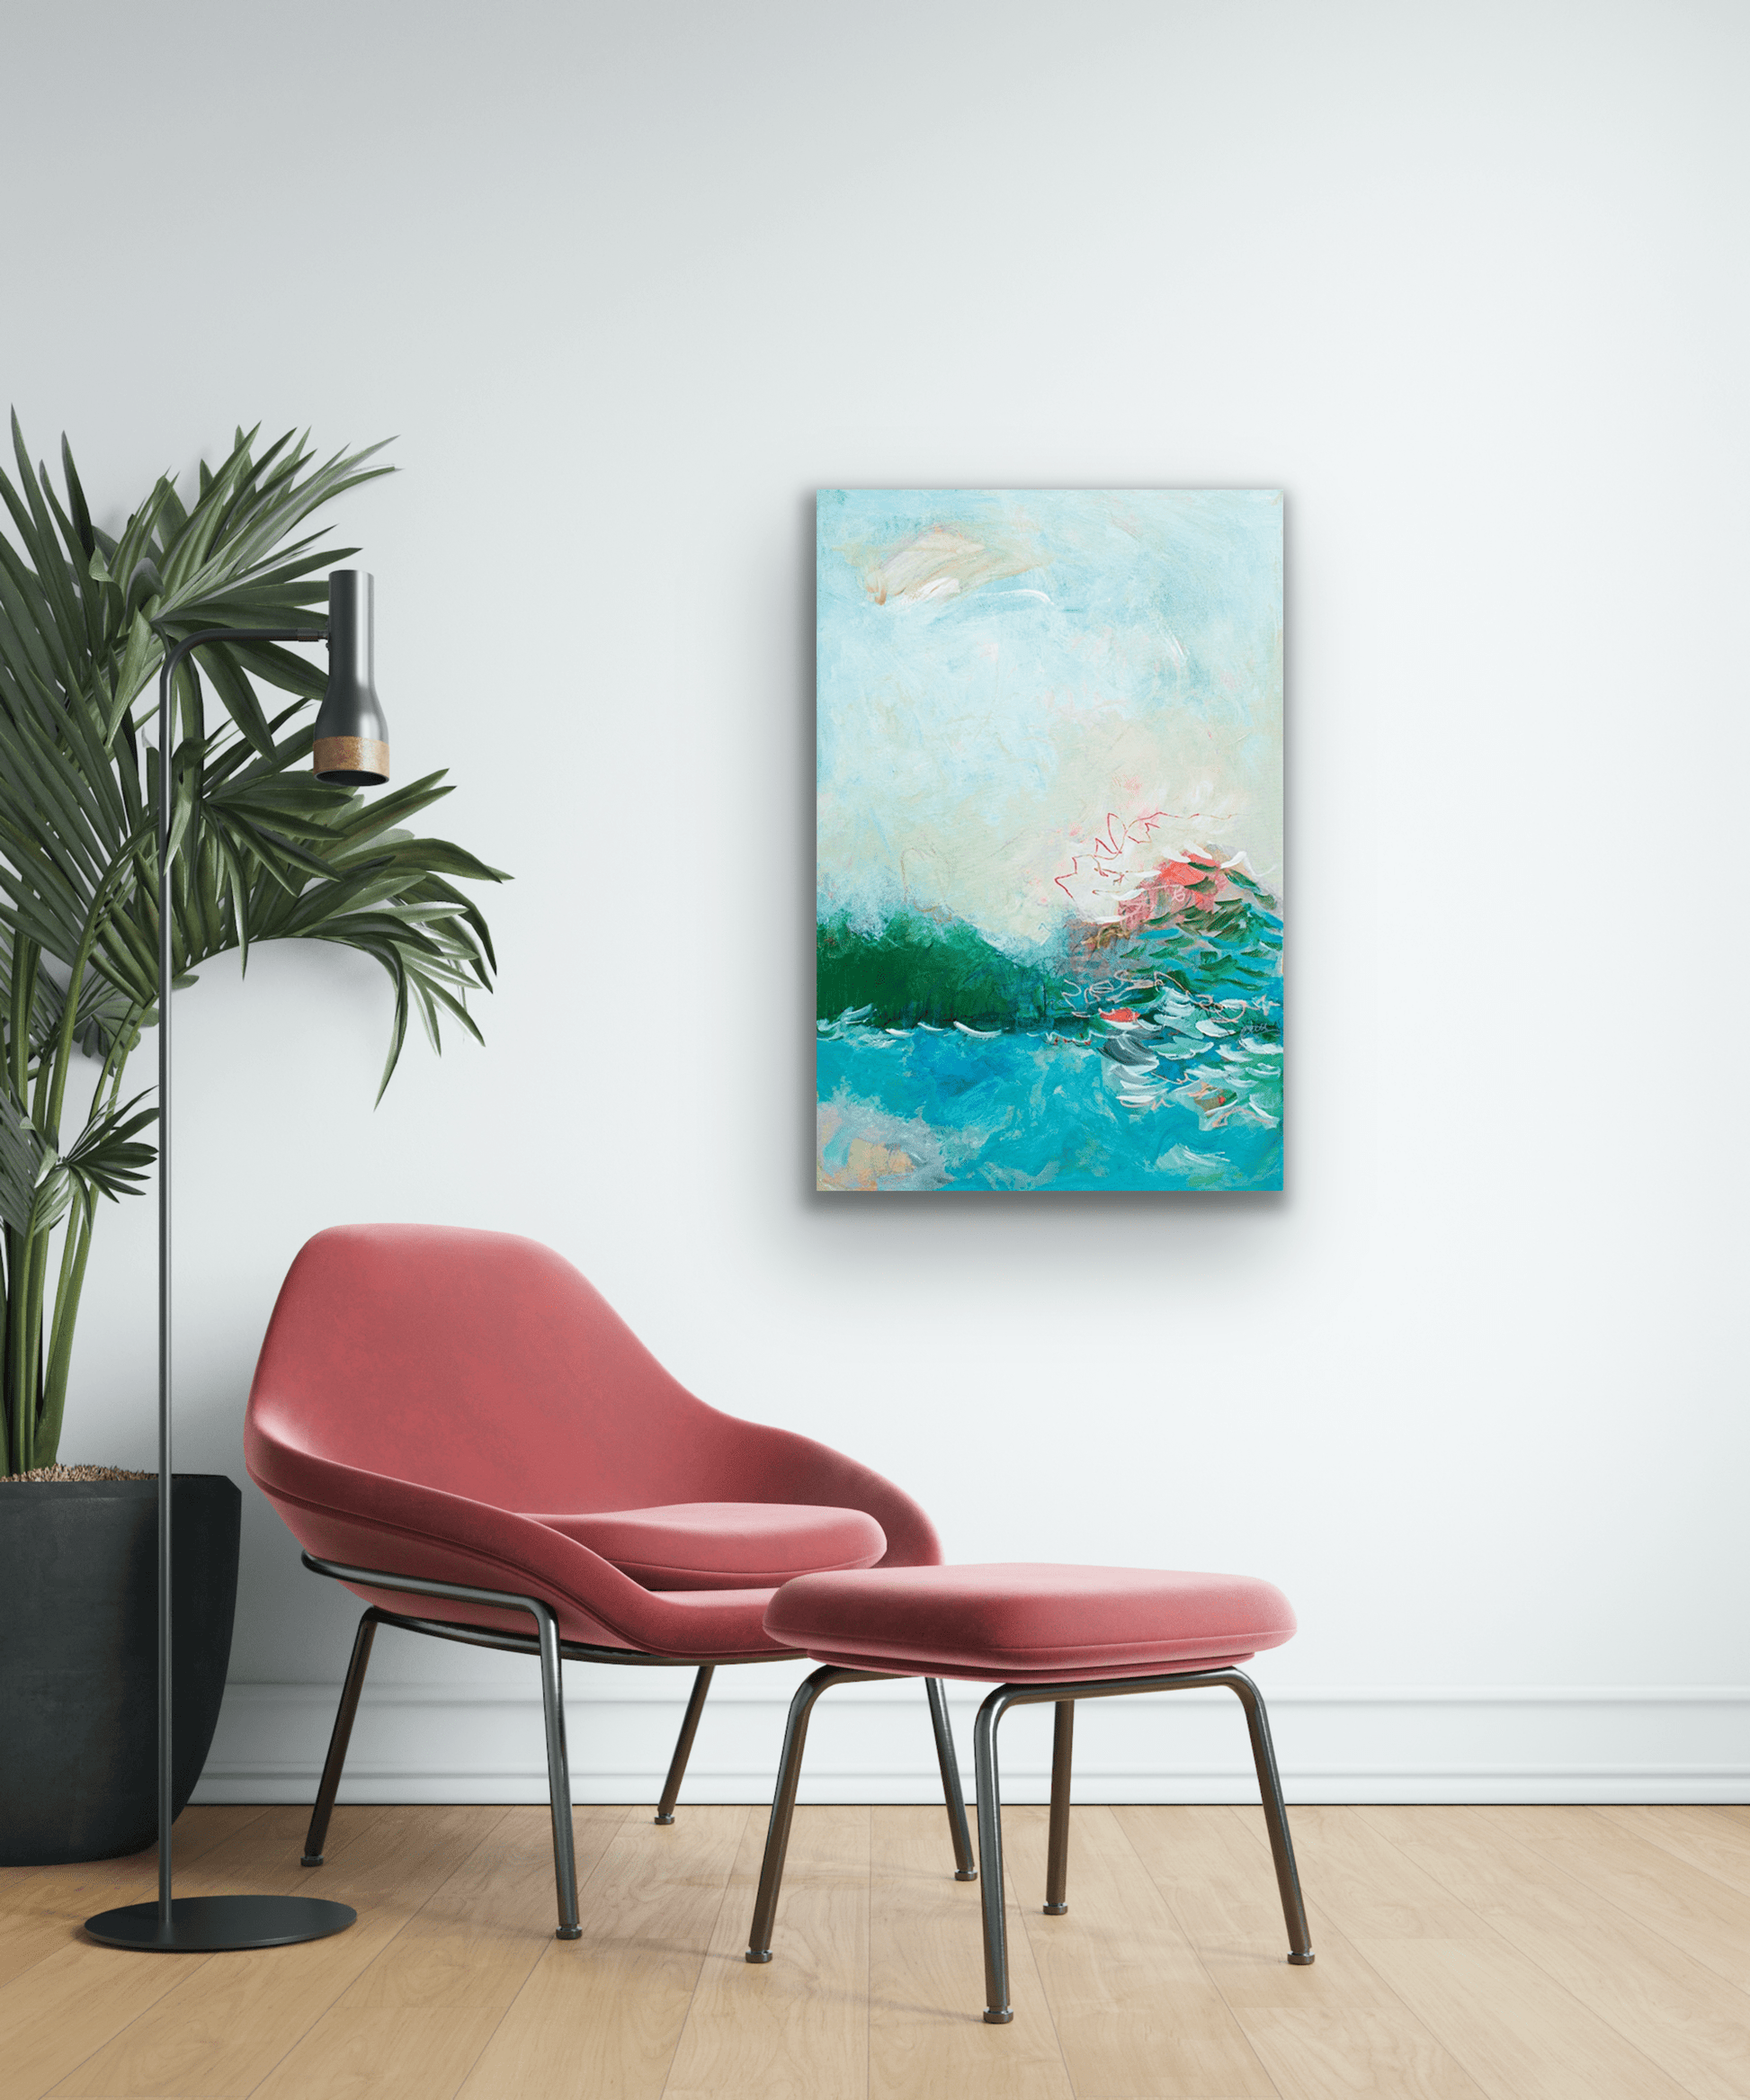 "Endless Horizon" comes in five different canvas print sizes to fit your wall perfectly.